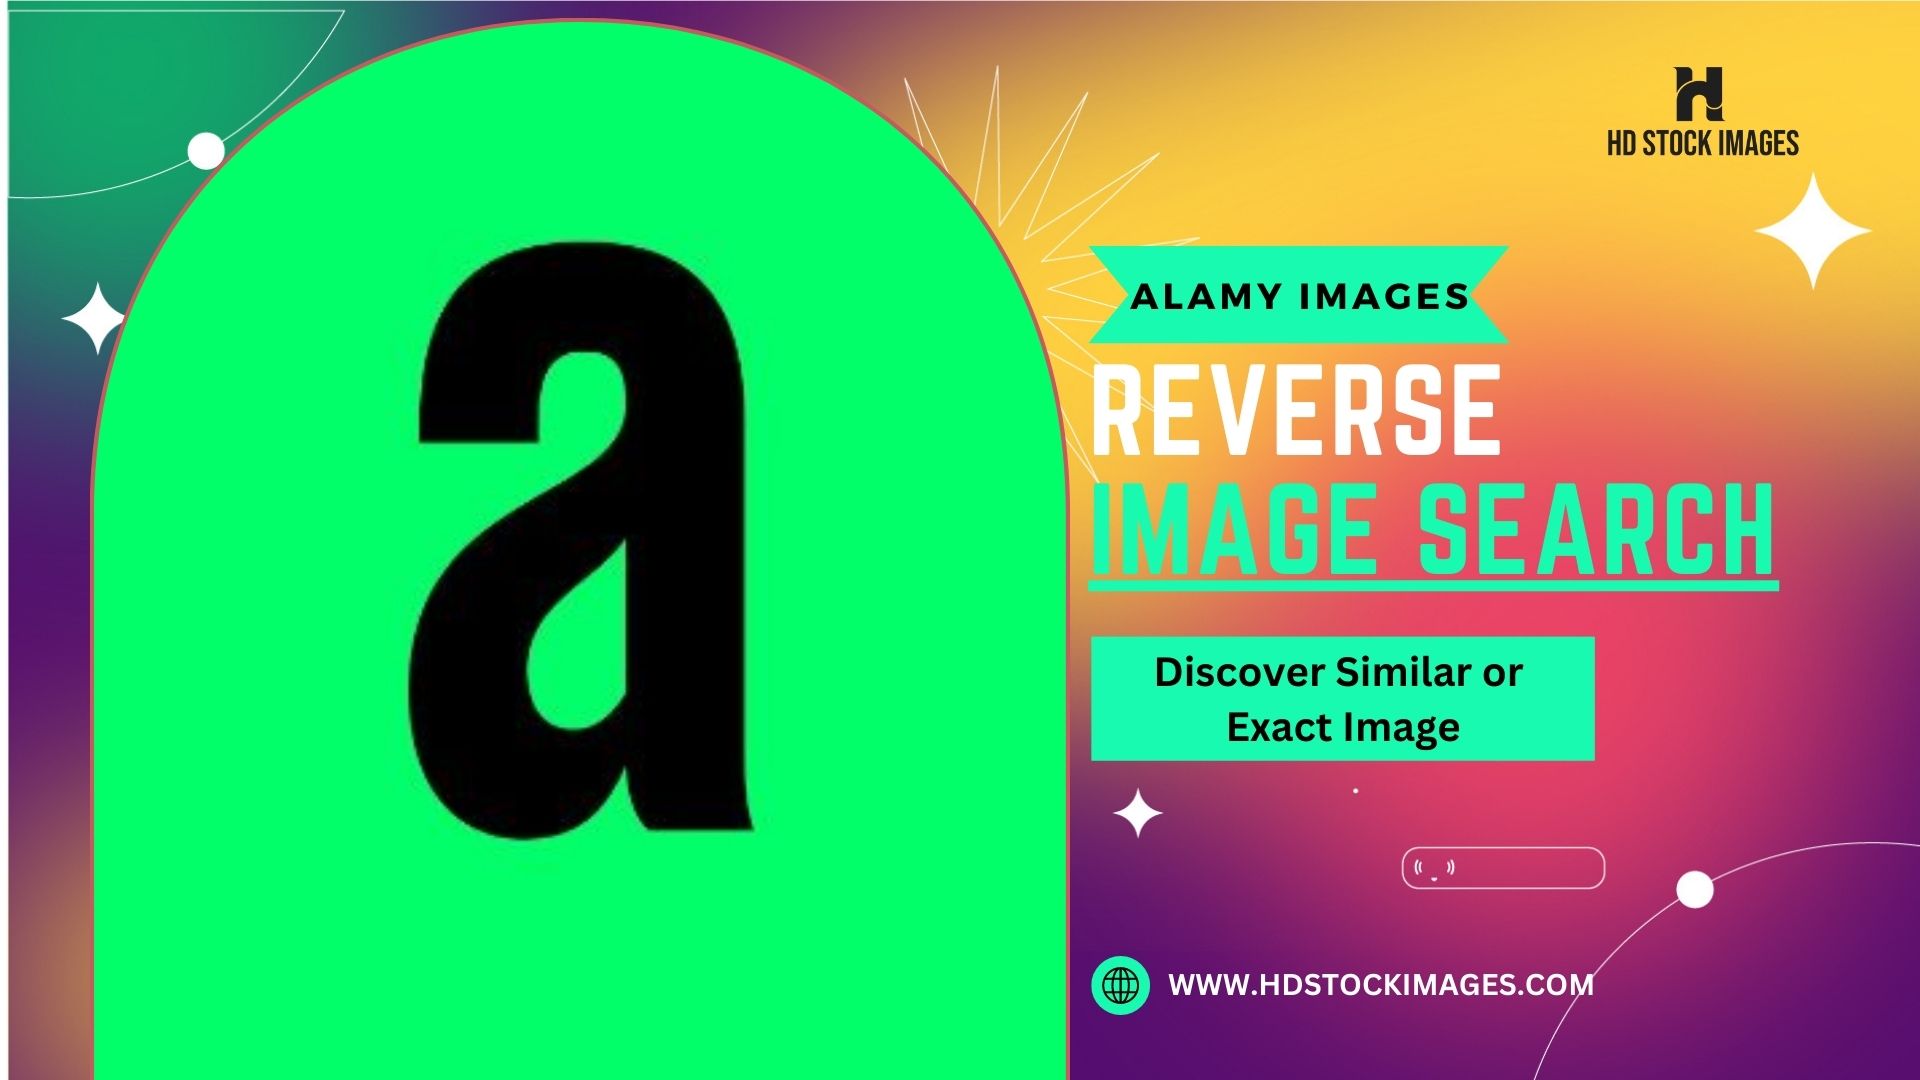 an image of Alamy Images Reverse Image Search: Discover Similar or Exact Image